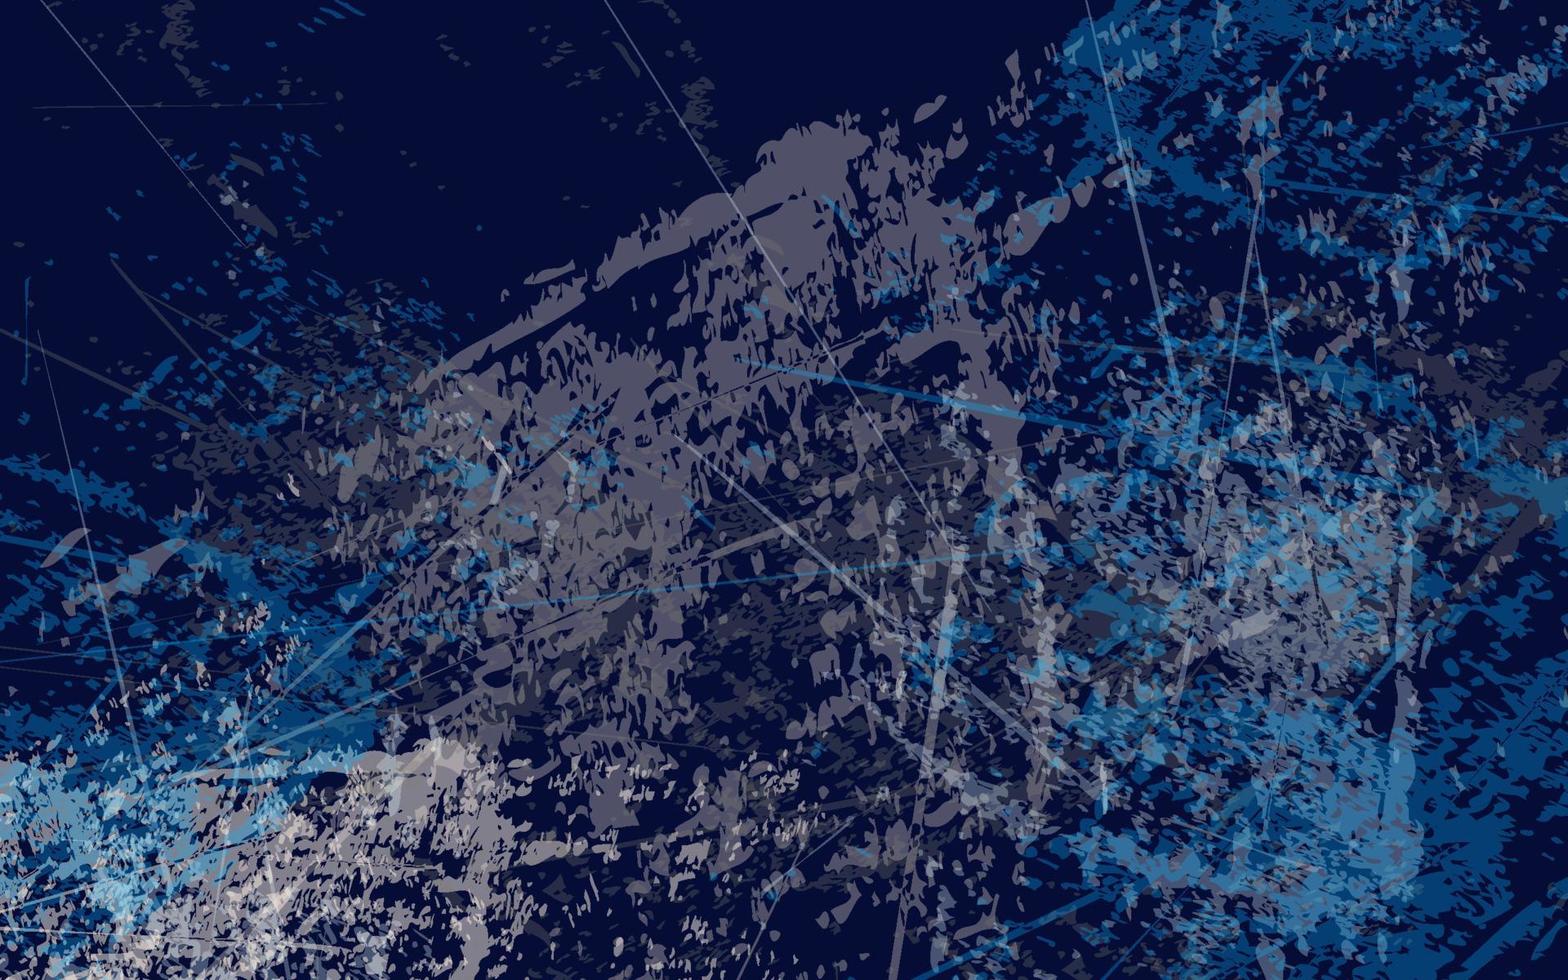 Abstract grunge texture dark blue color background vector